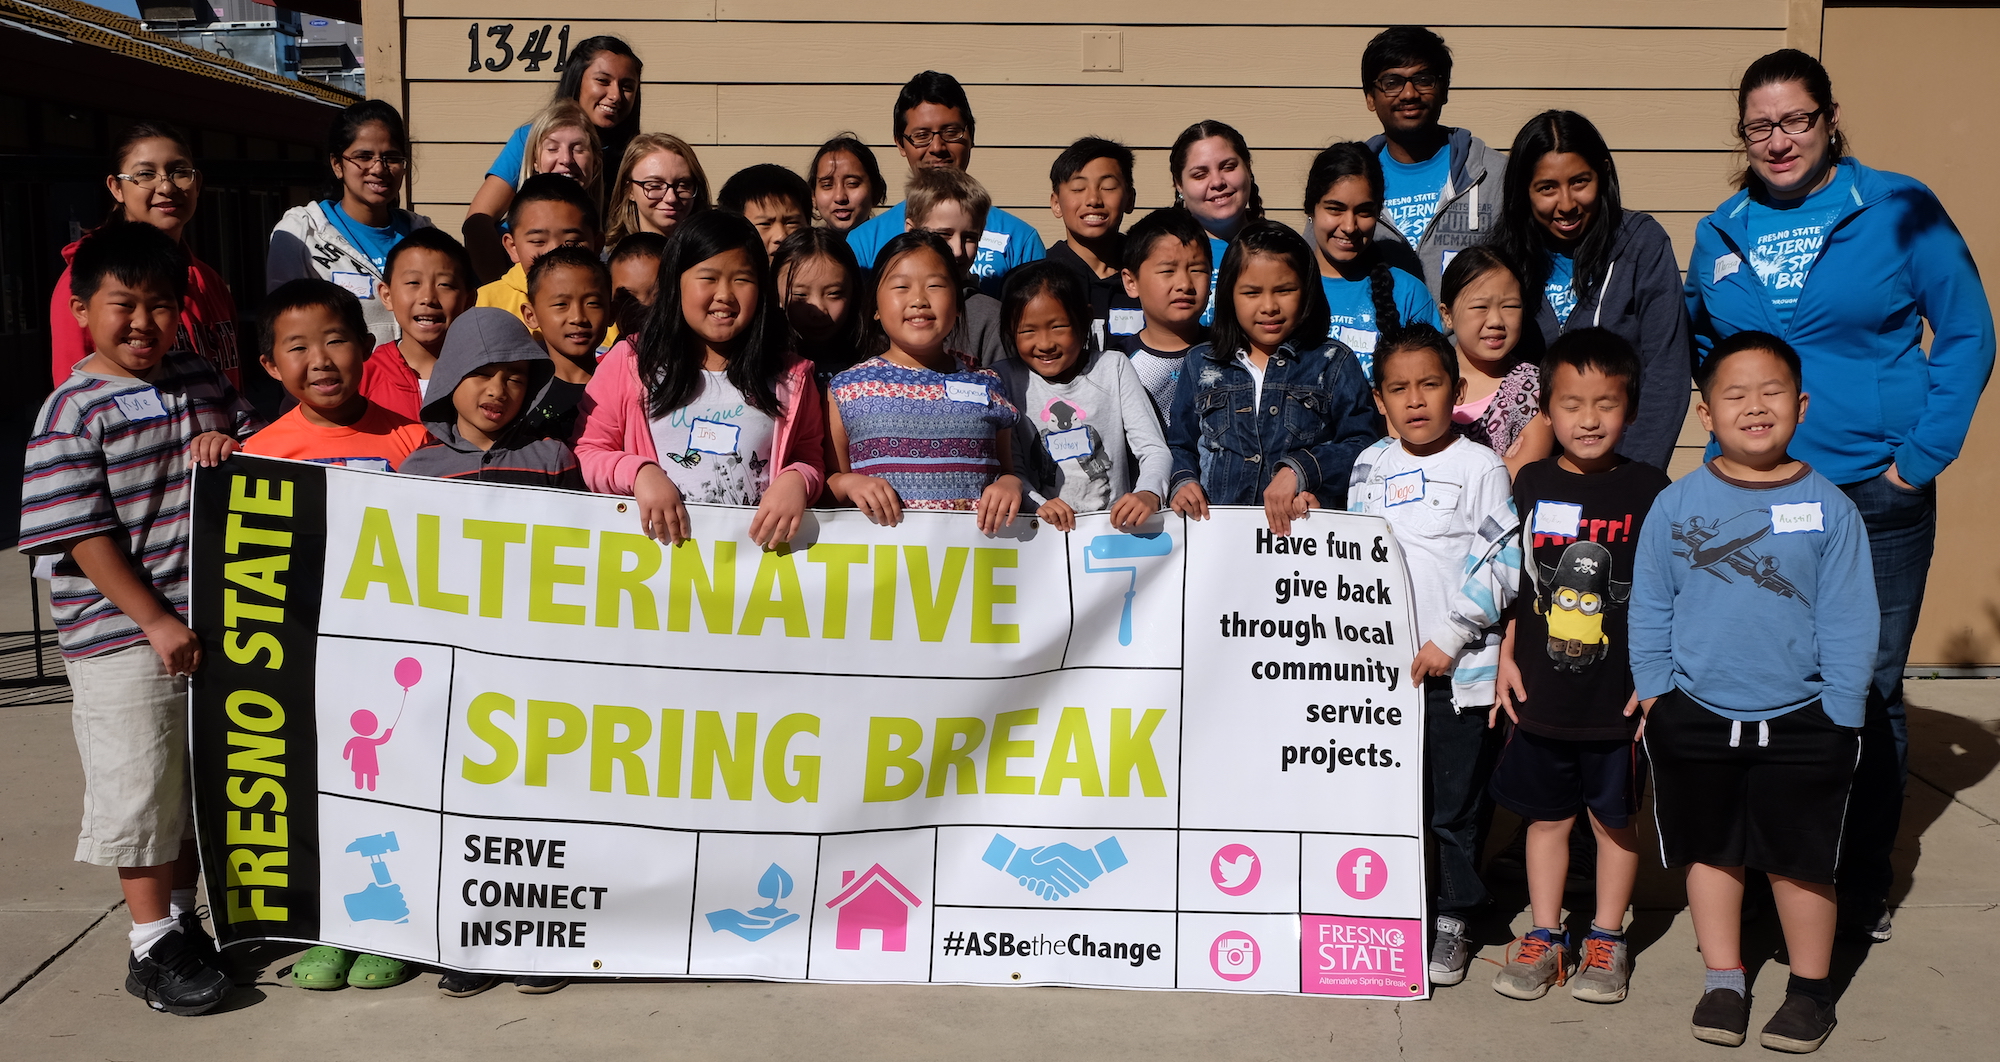 alternative spring break group photo with sign